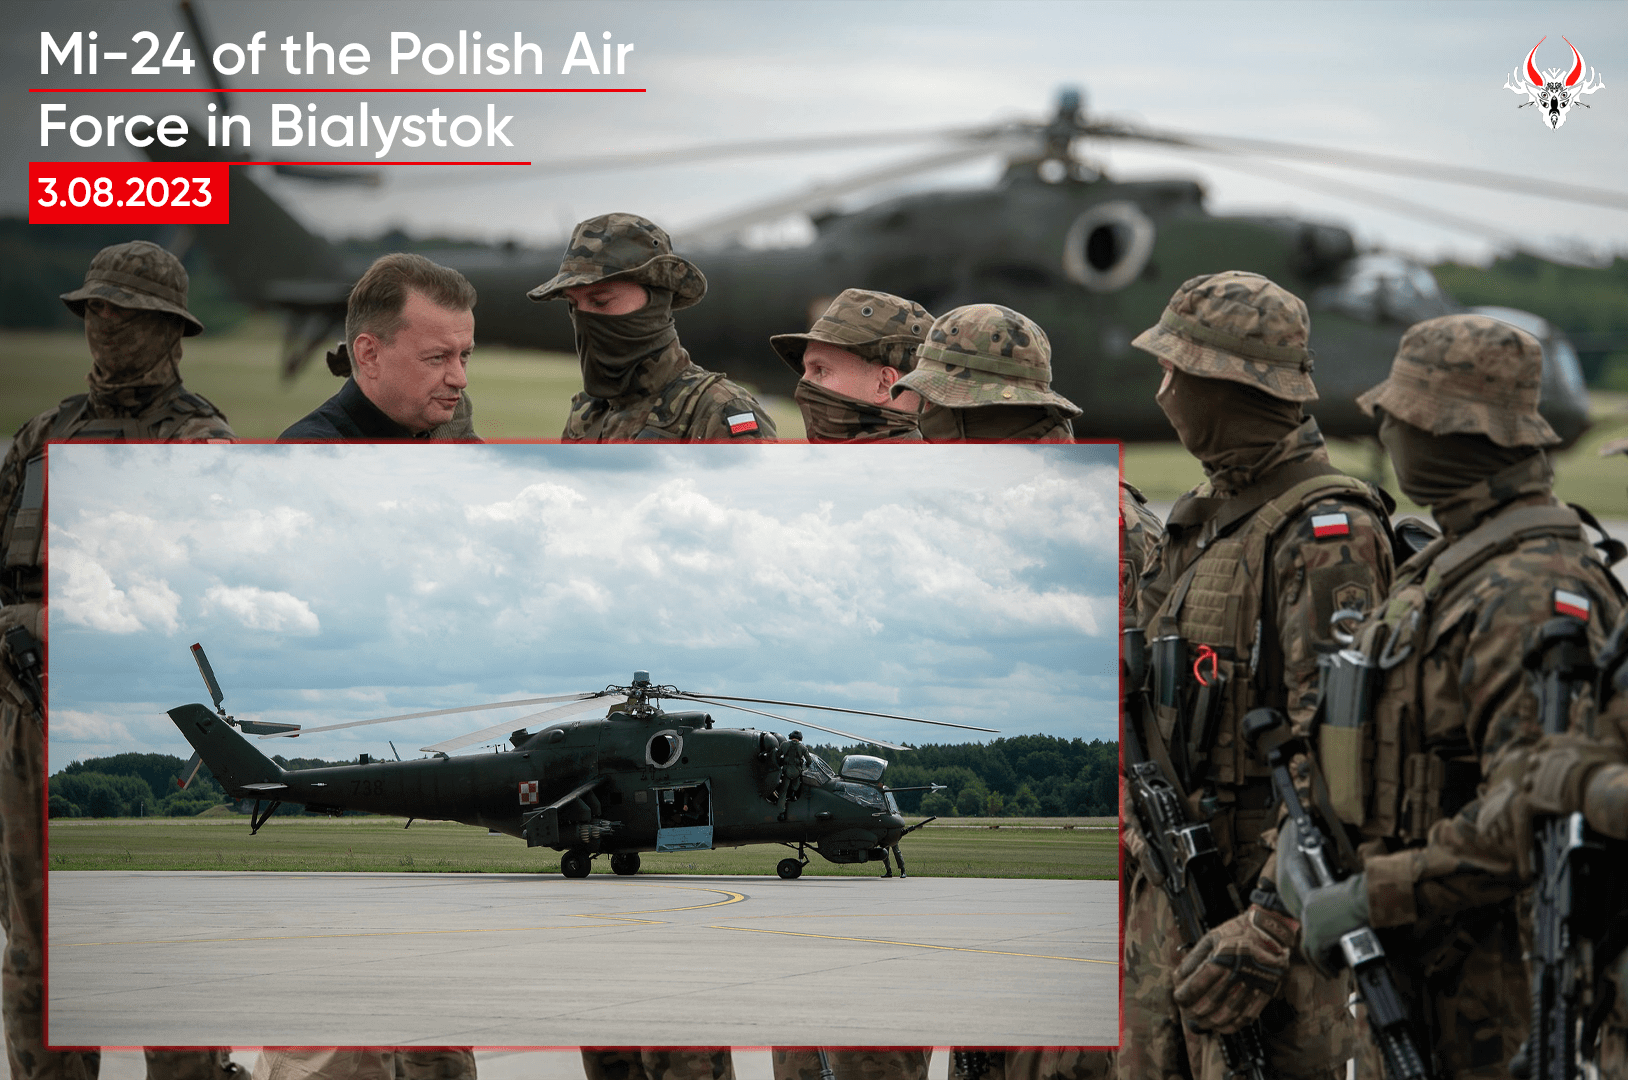 The helicopter indeed crossed the Polish border, but it’s not clear whose helicopter it was